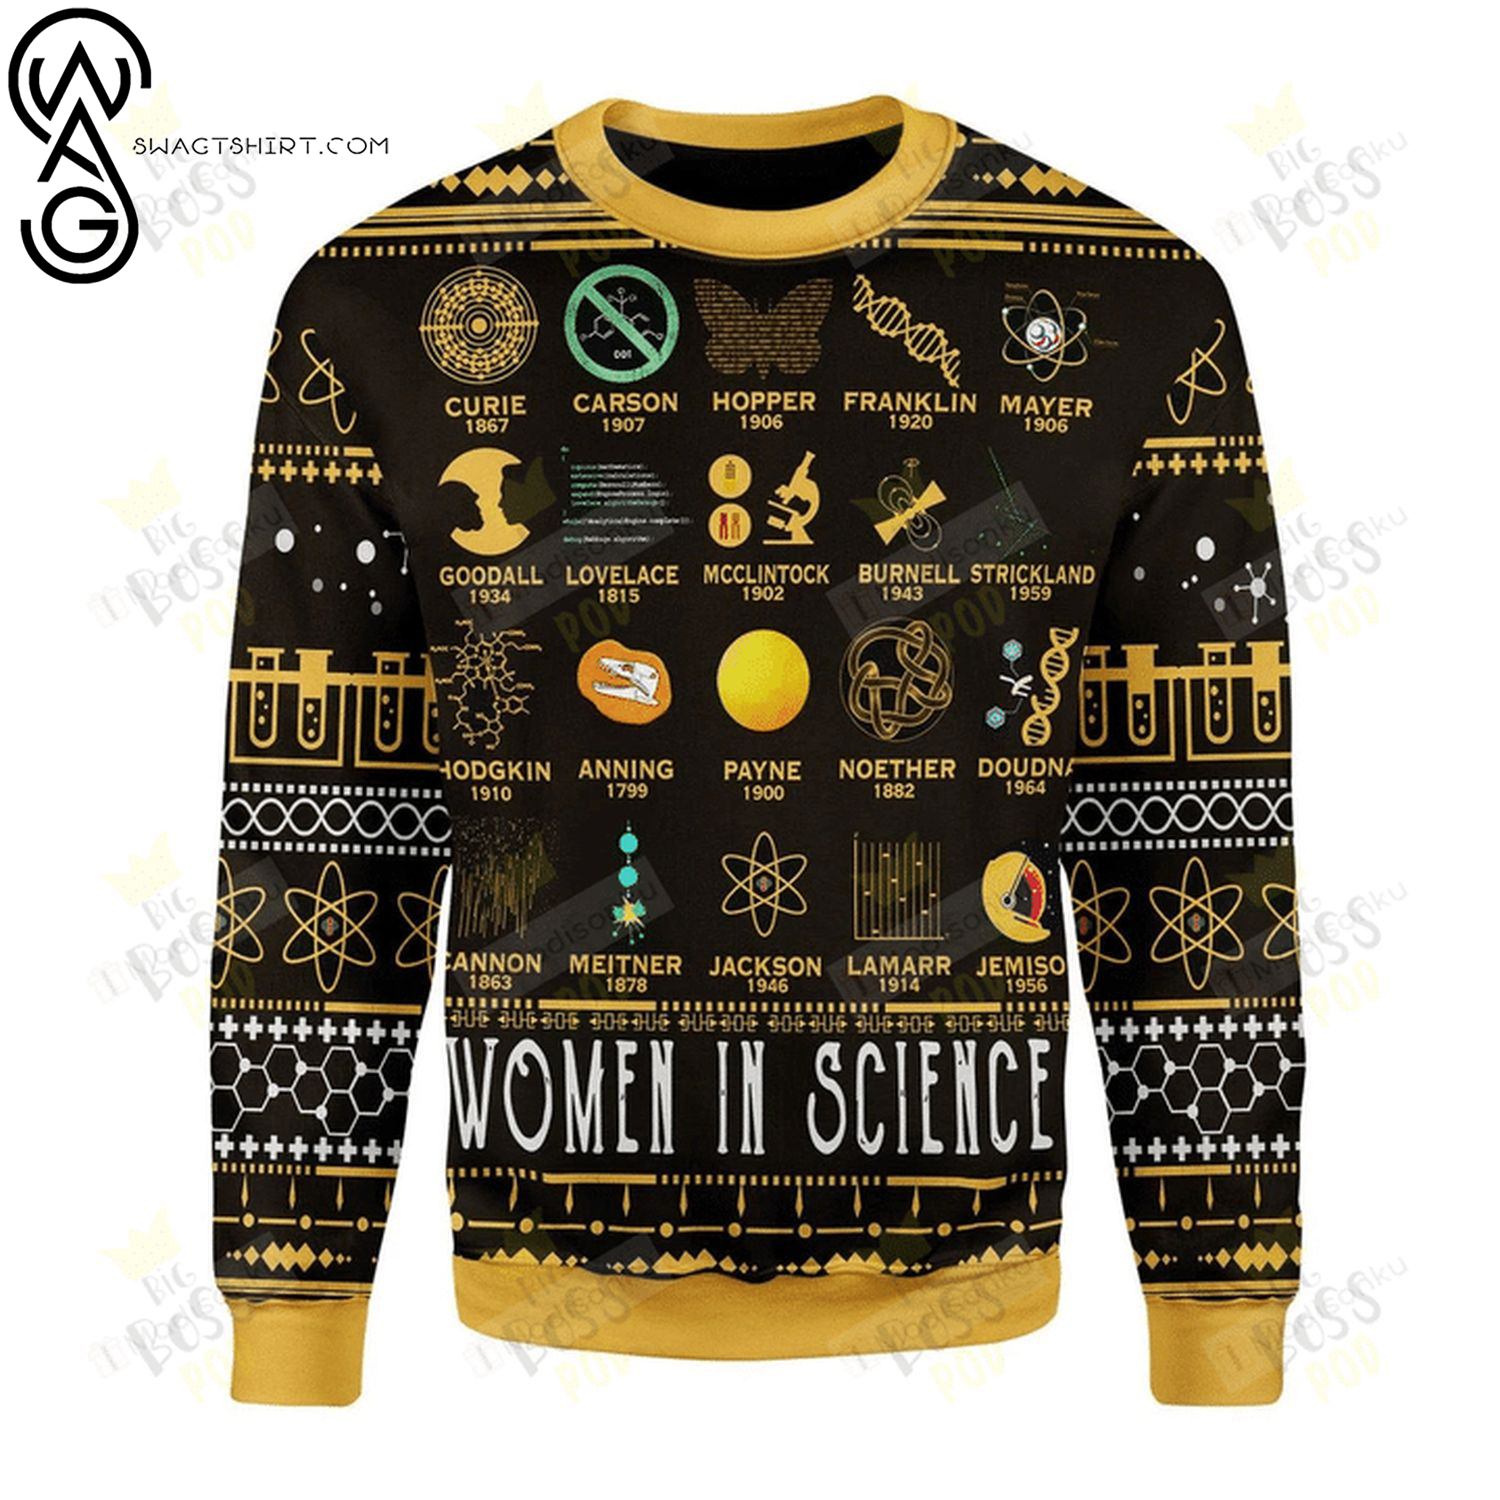 Women in science full printing ugly christmas sweater